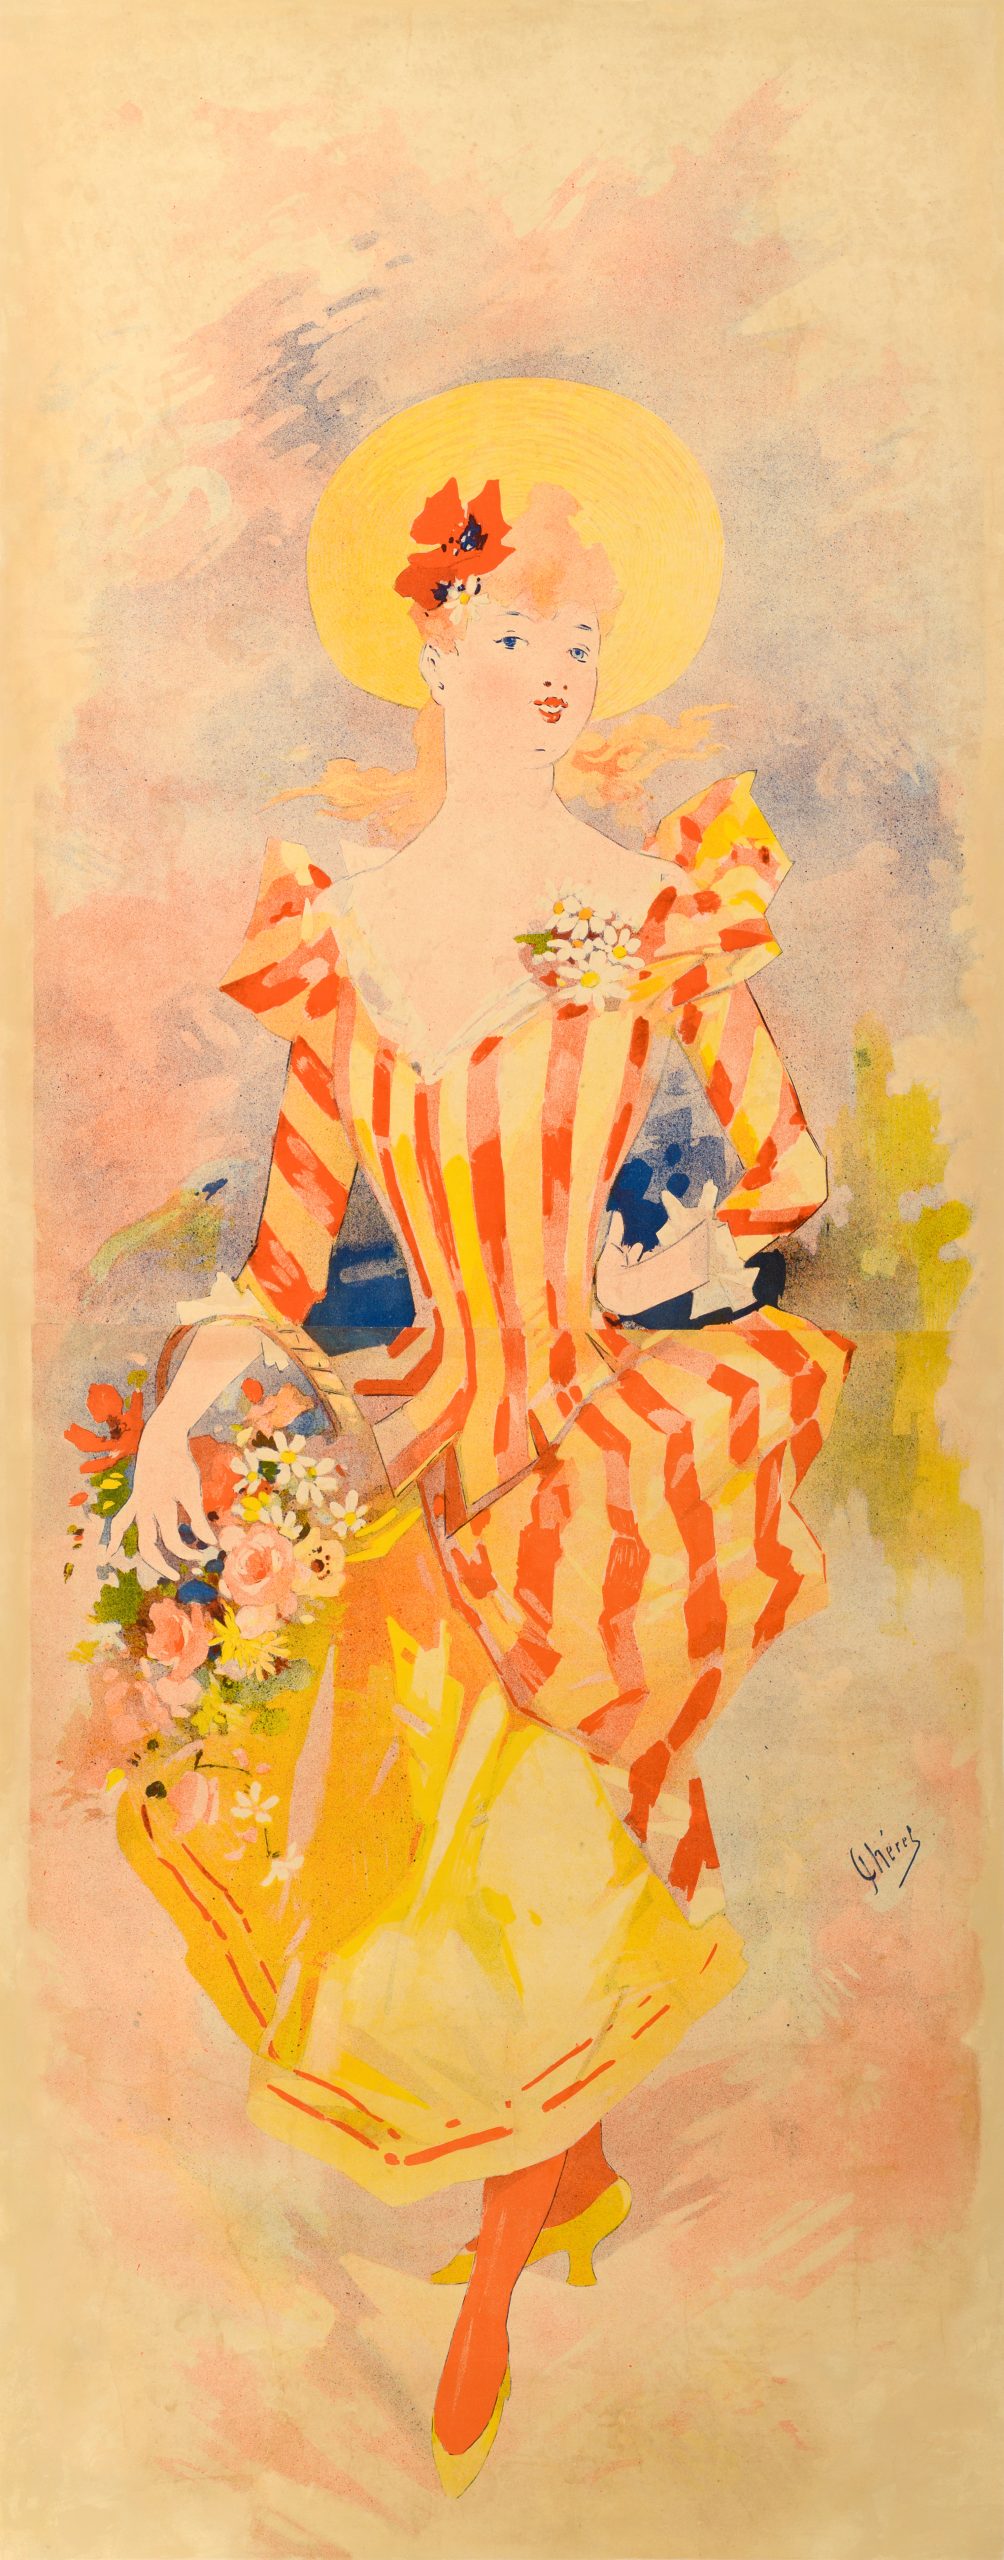 Illustrational poster of a woman with blonde hair wearing a yellow sun hat and yellow and red striped dress walking while carrying a basket of flowers.